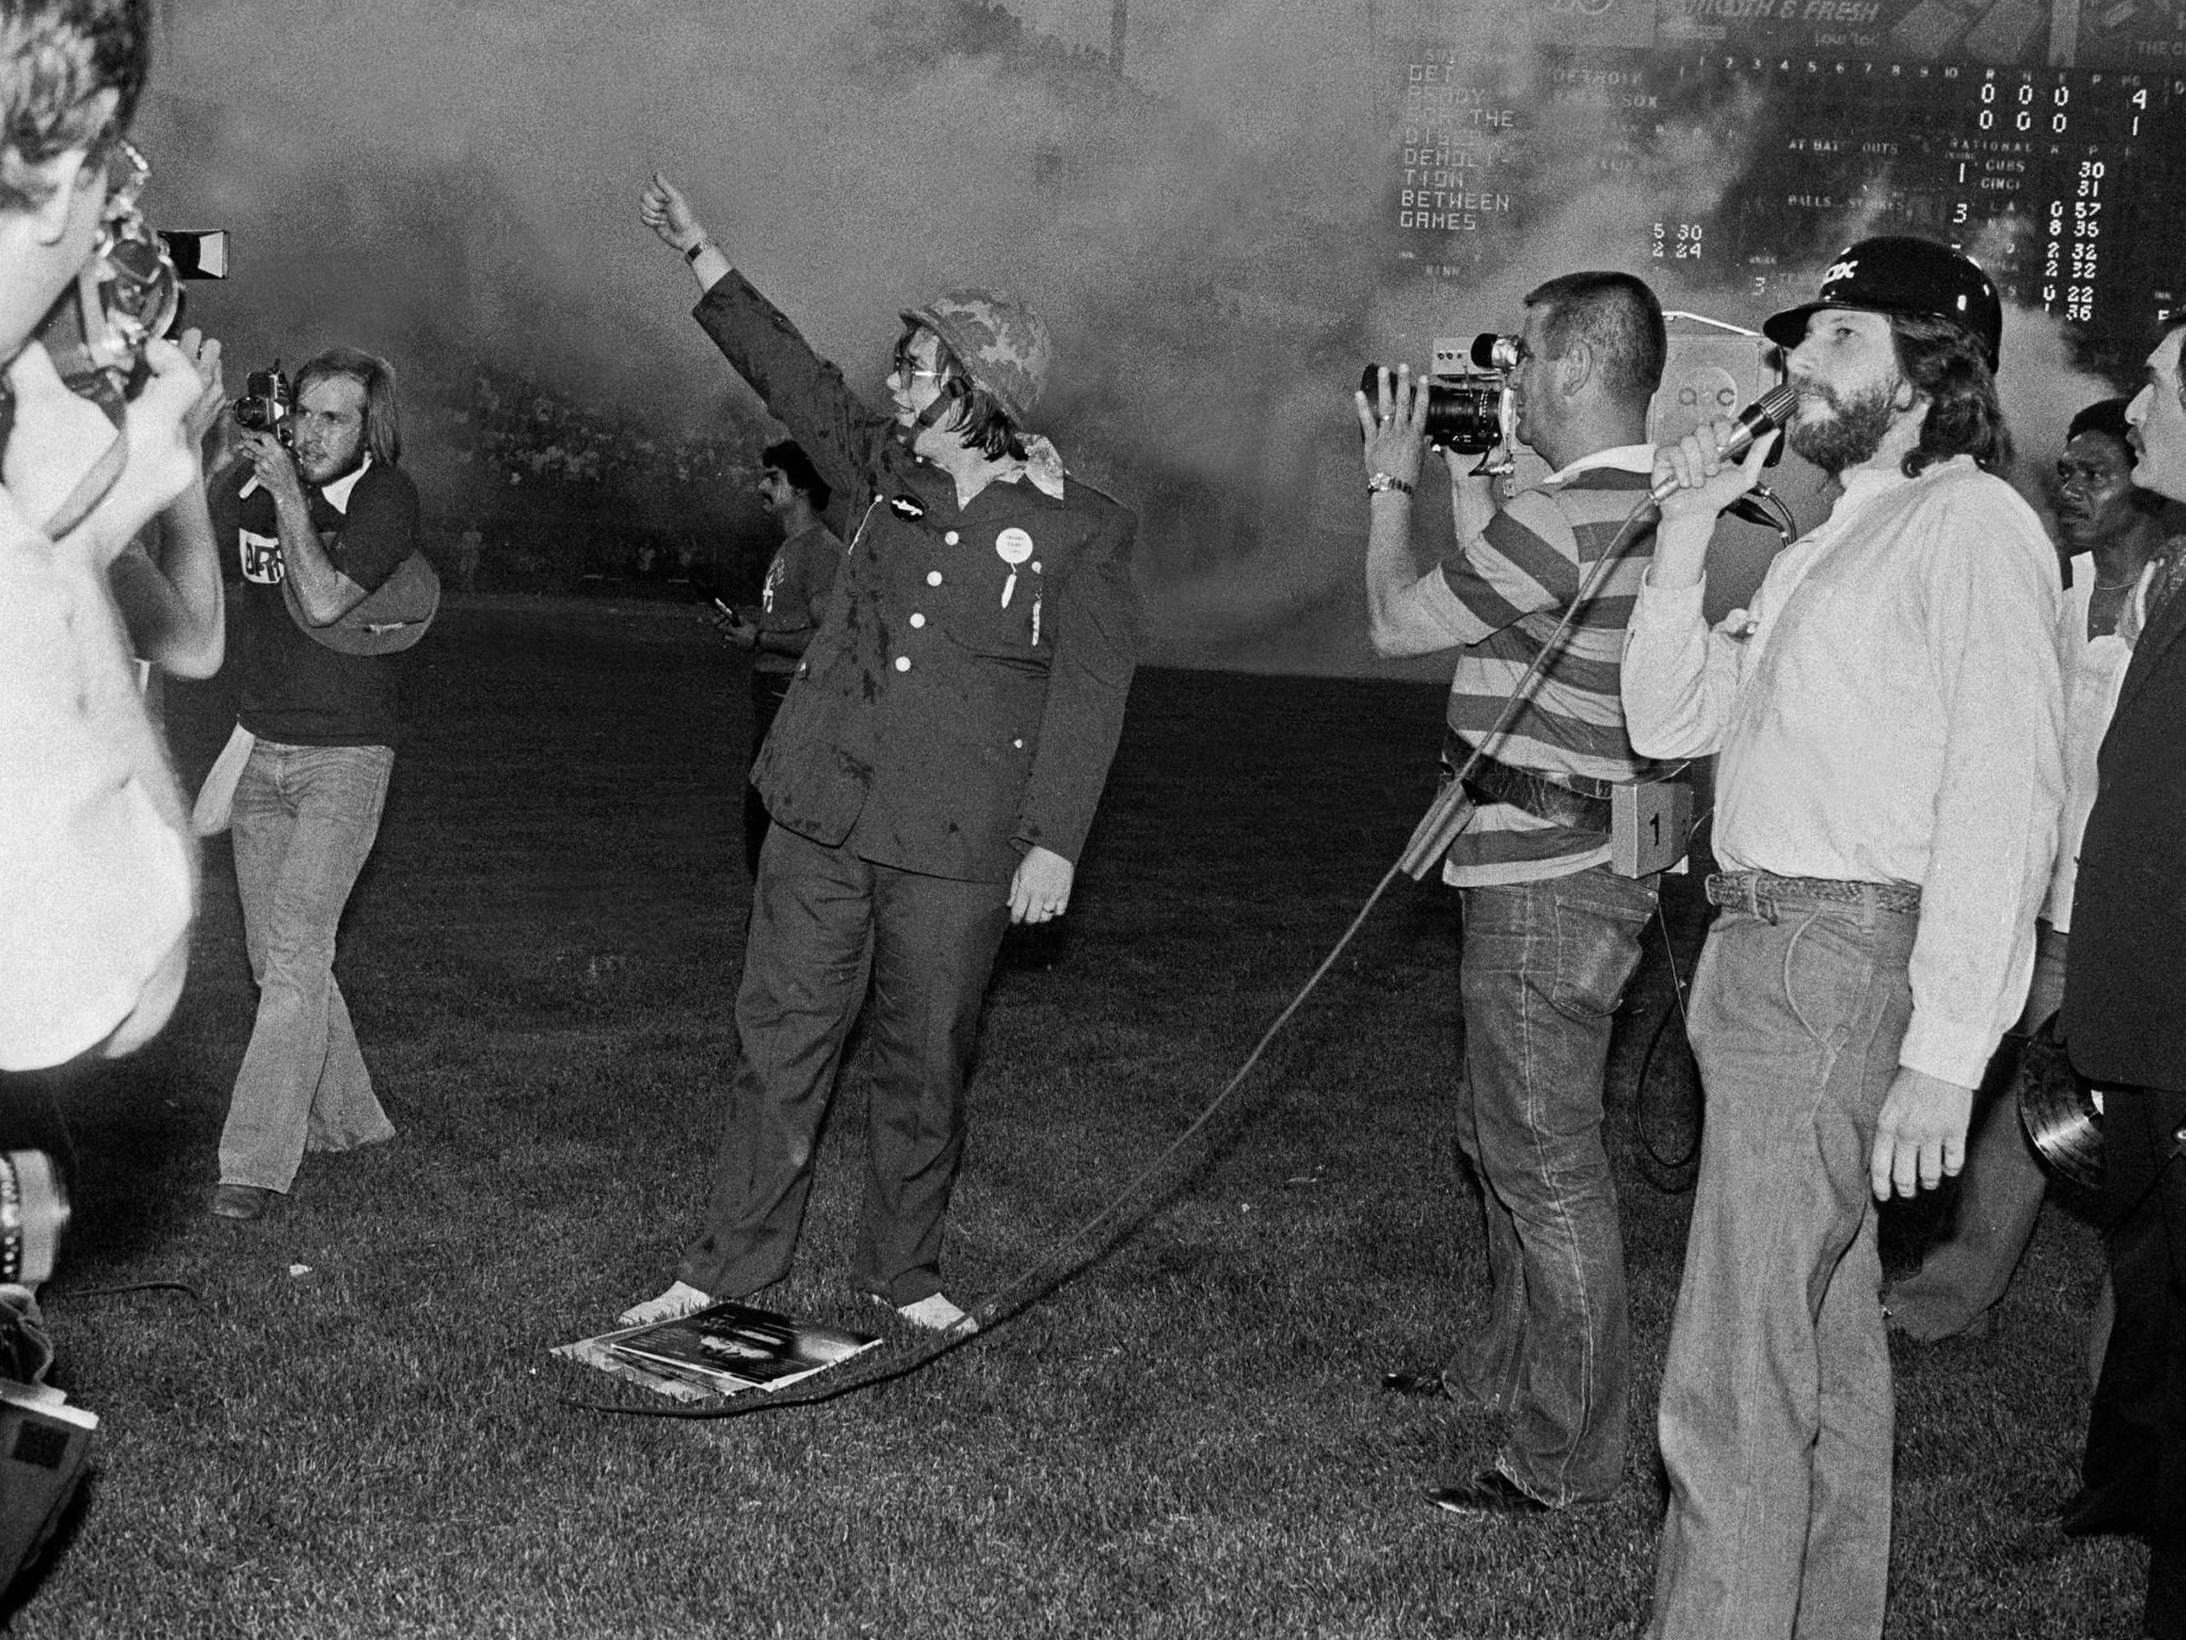 Disco Demolition Night: The Day the Disco Ball Dropped